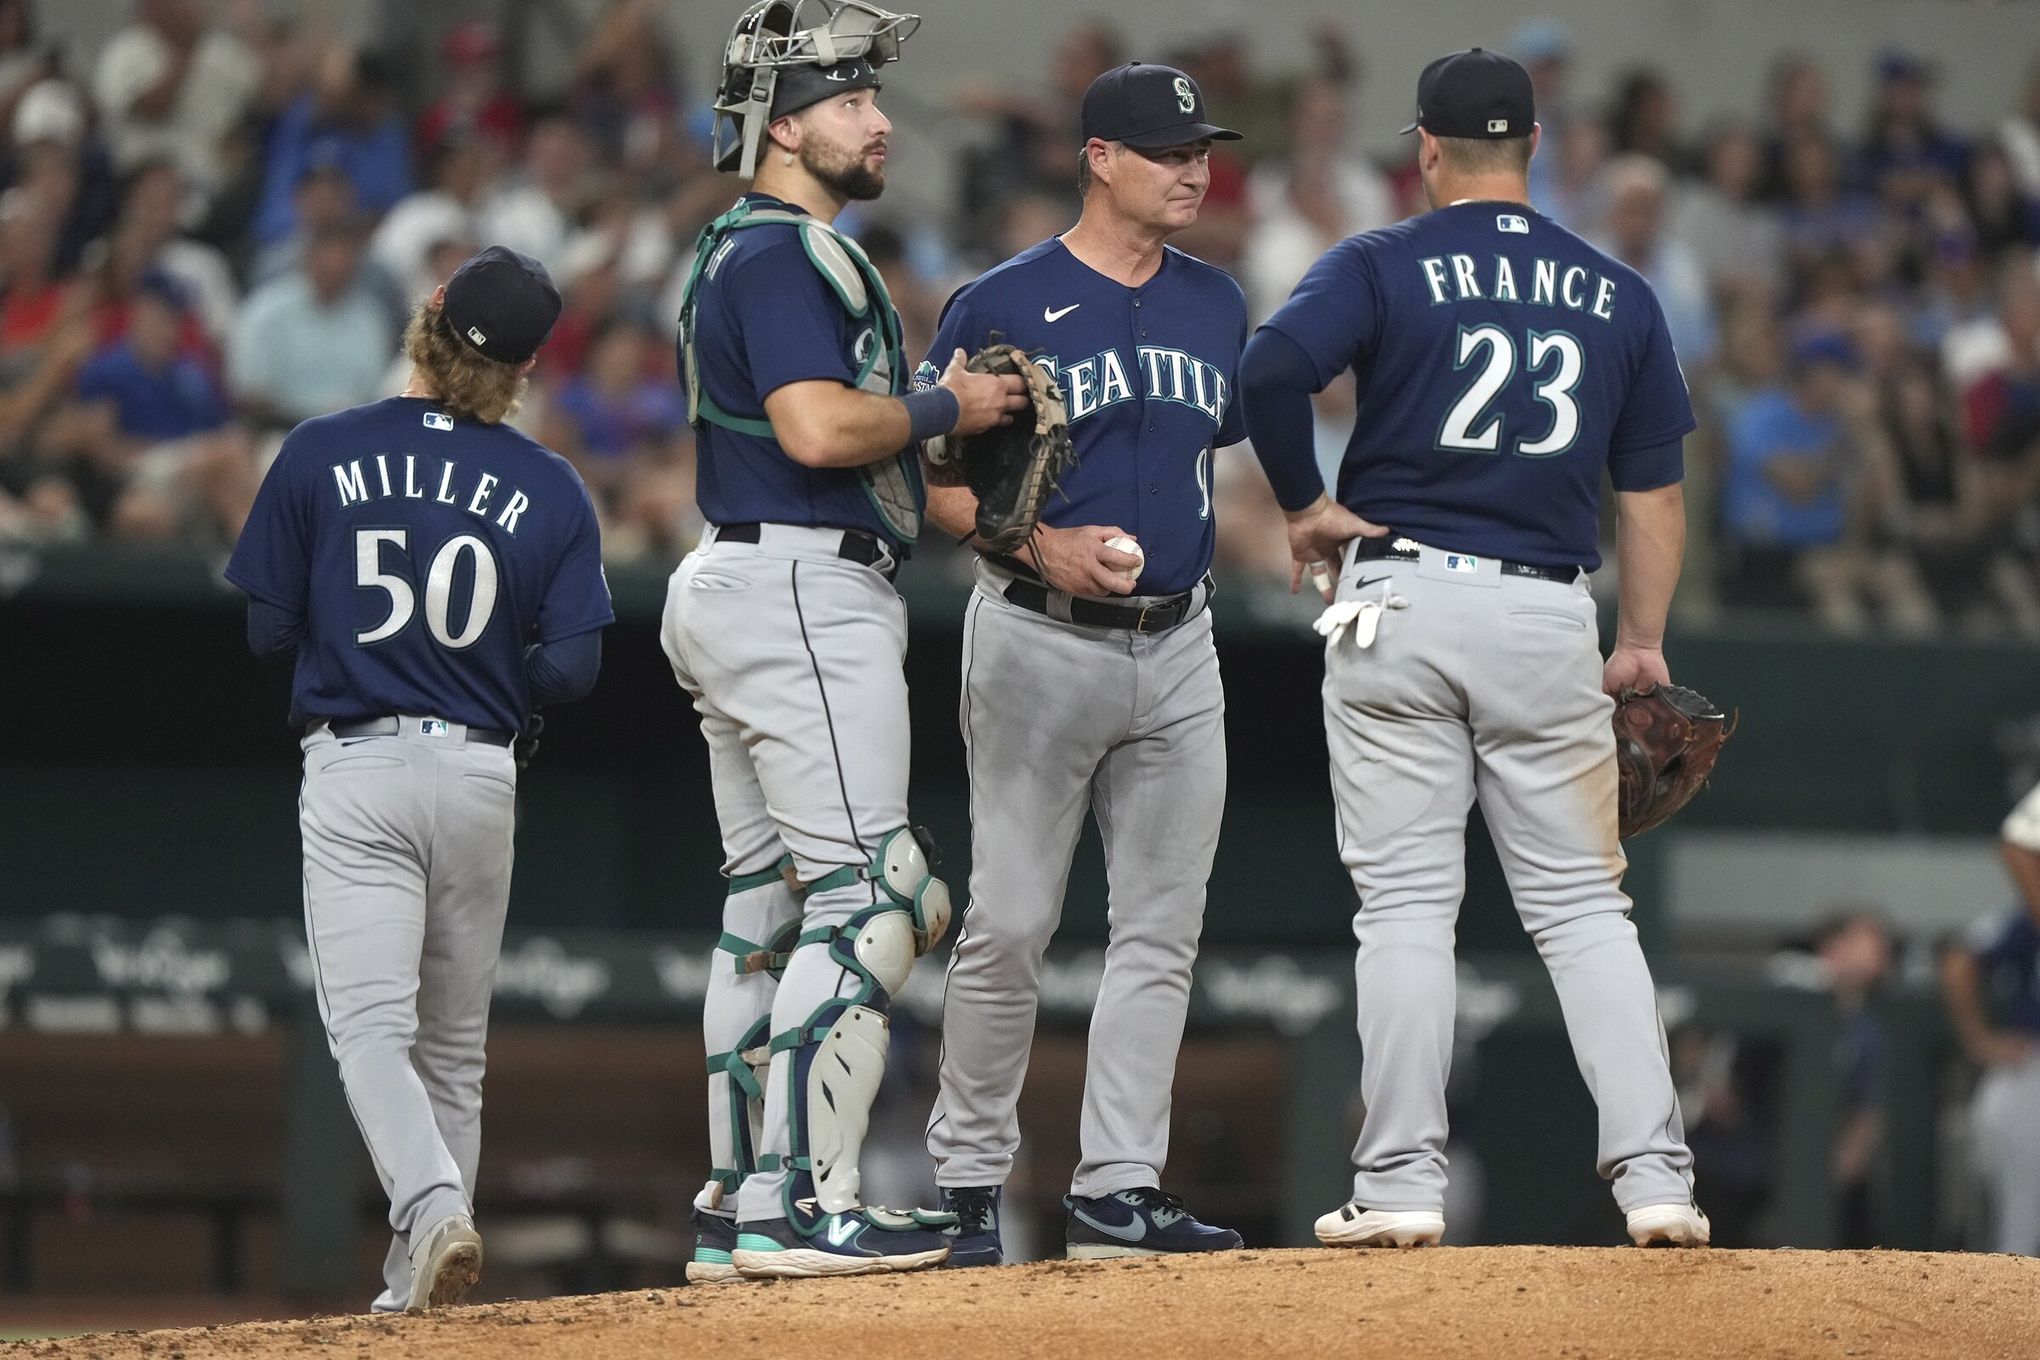 Mariners open key series, stretch run to make playoffs with loss